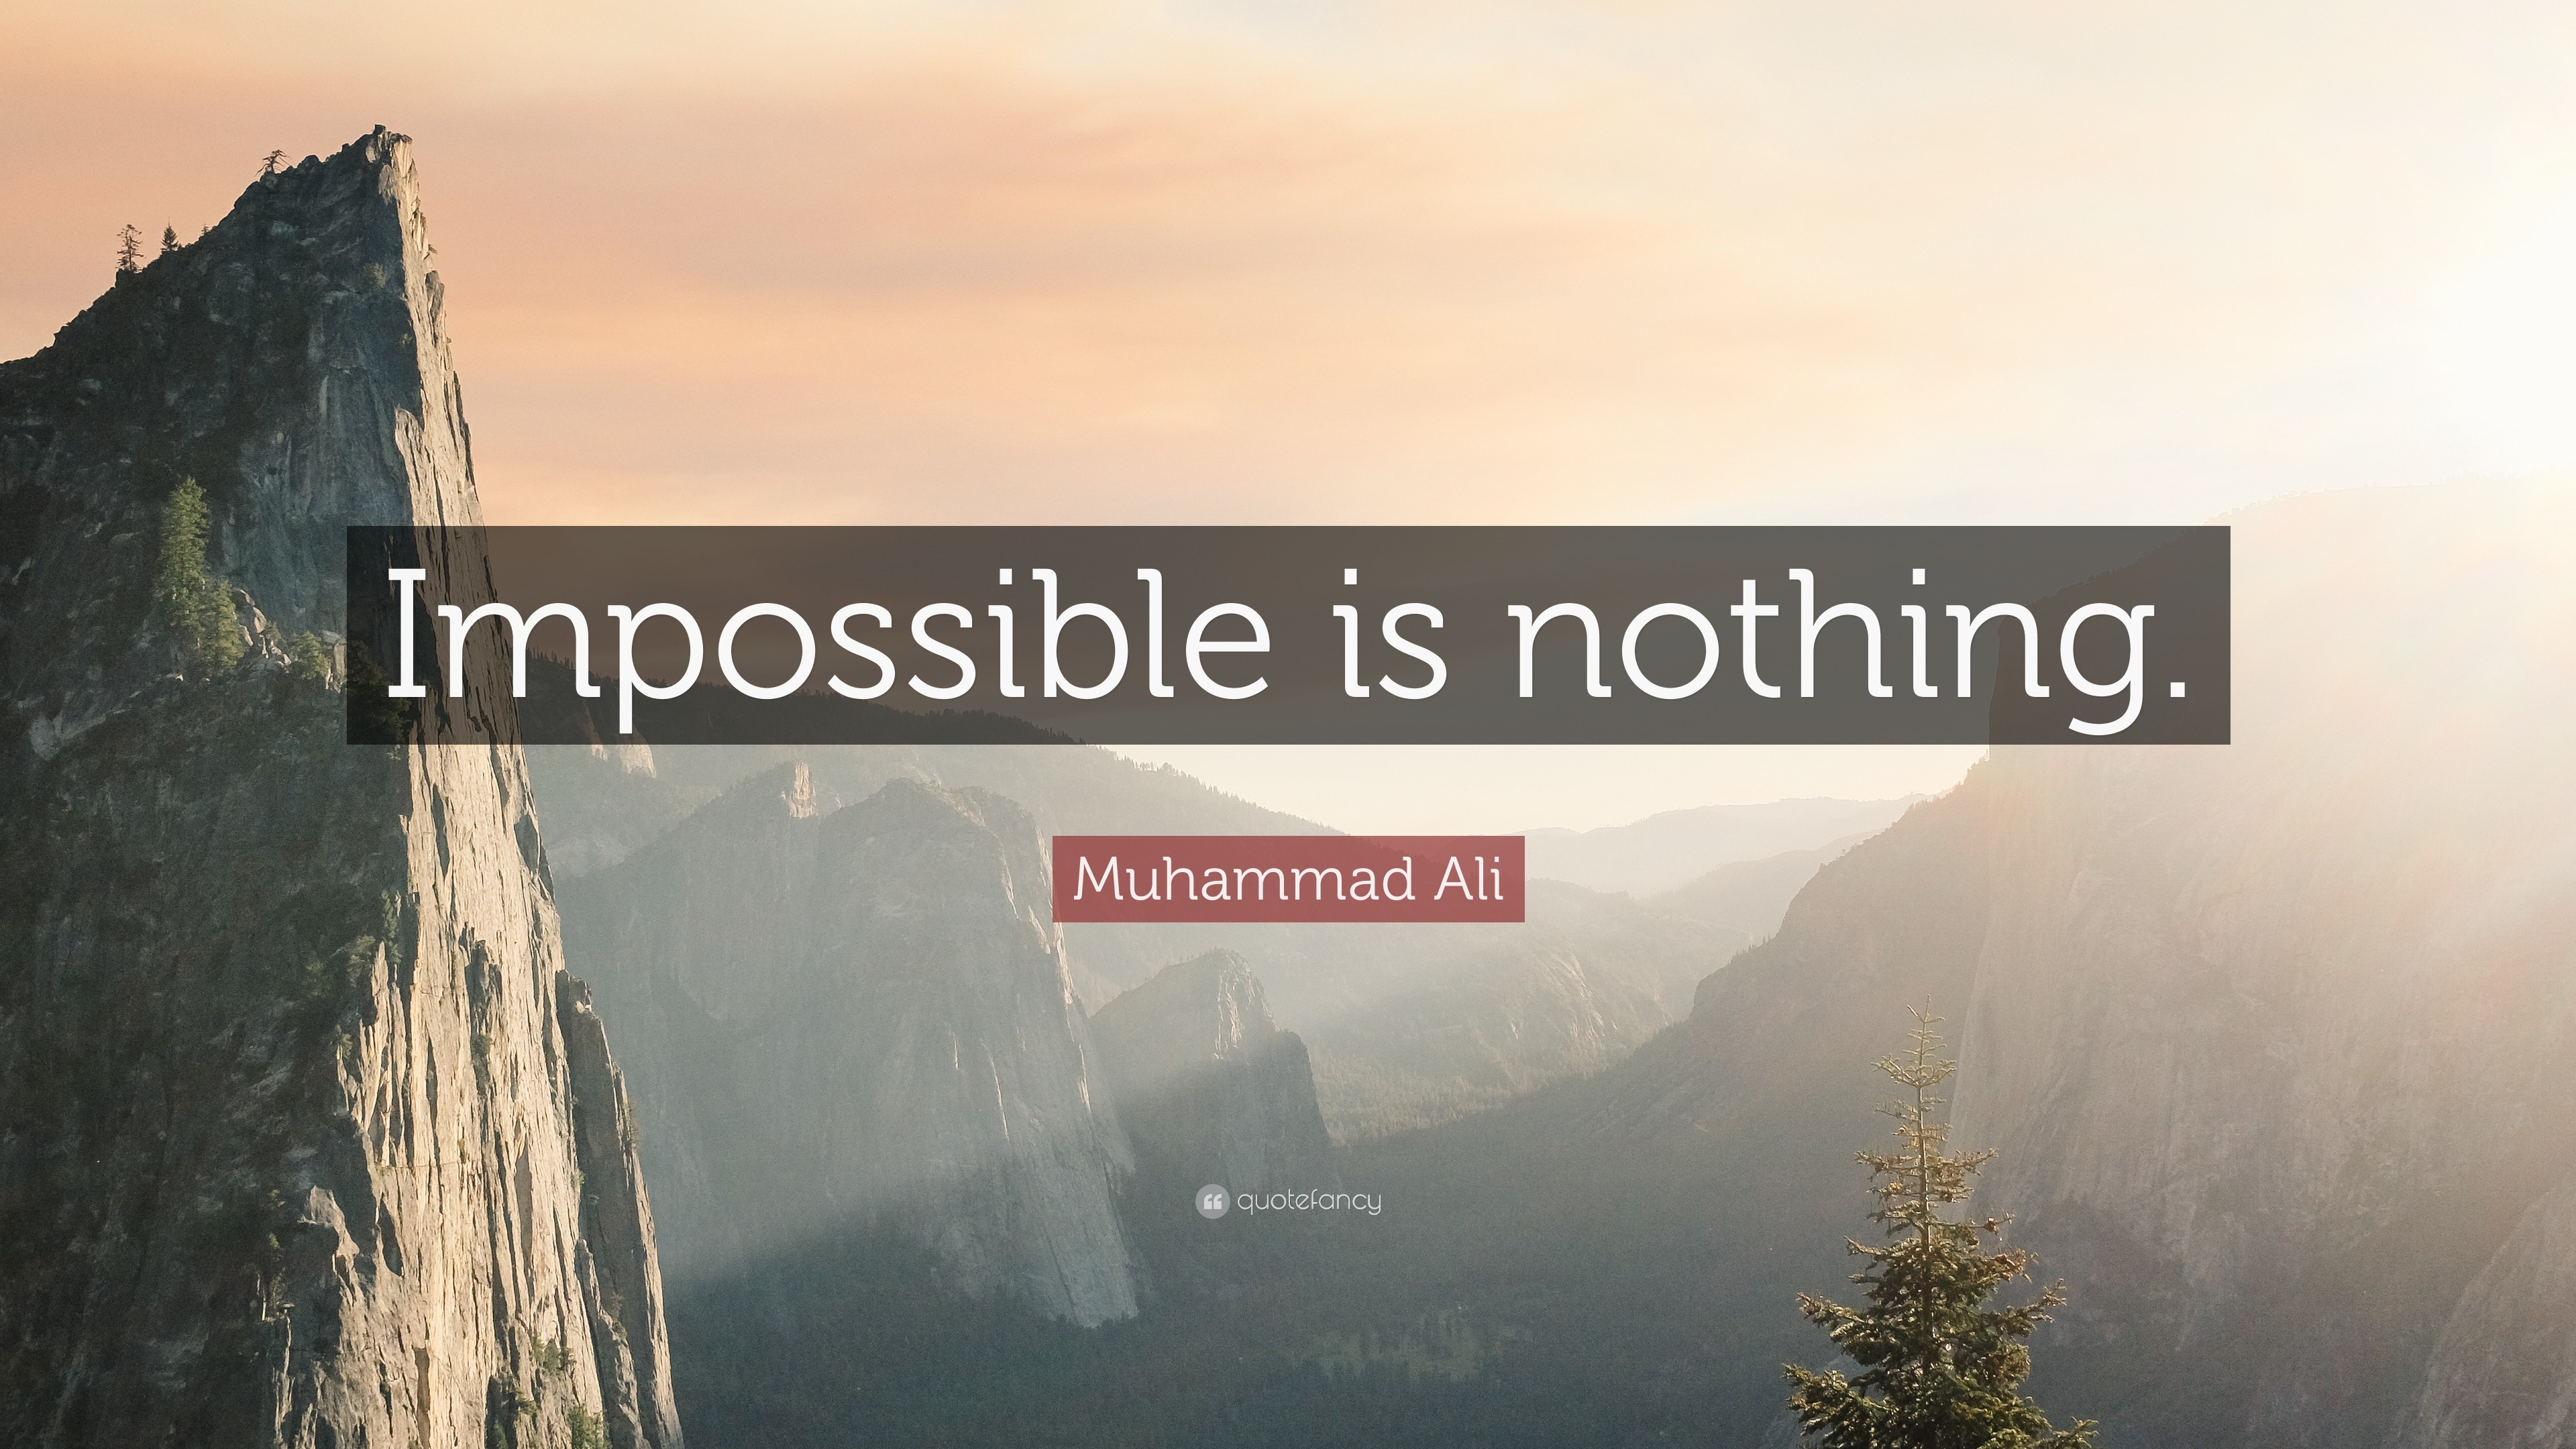 Muhammad Ali “Impossible is nothing.”